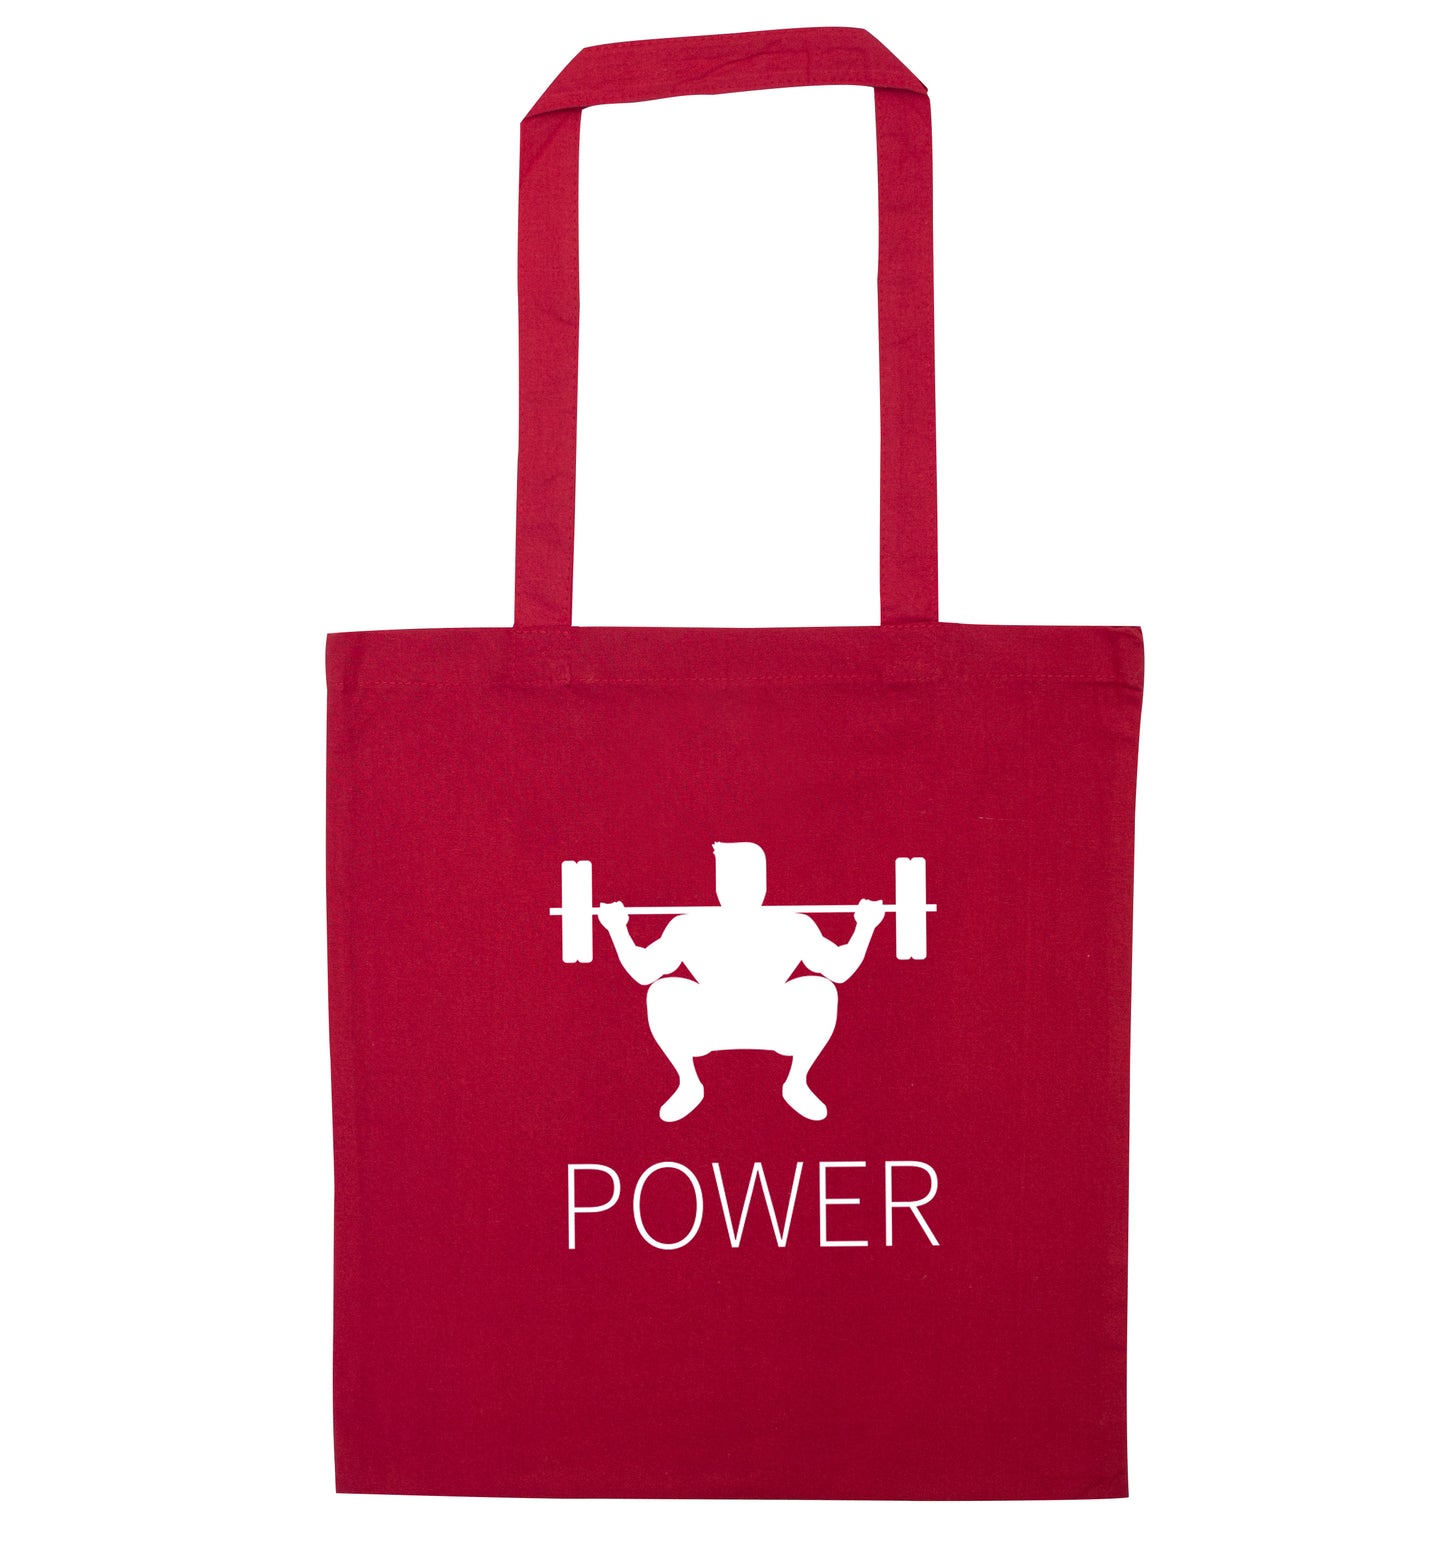 Lift power red tote bag